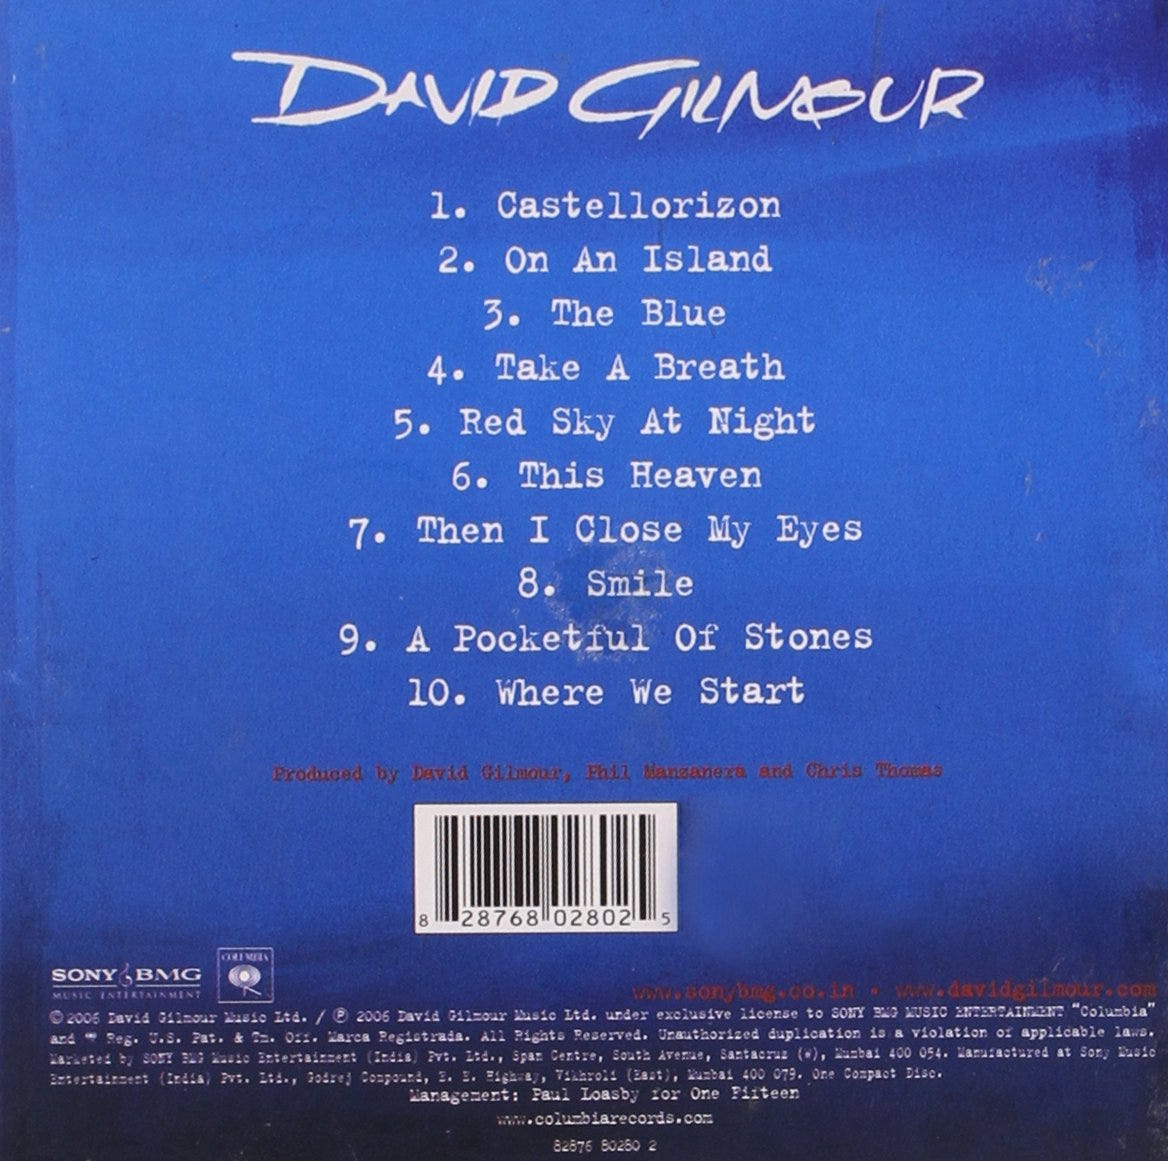 Reverse cover of 'On an Island' by David Gilmour